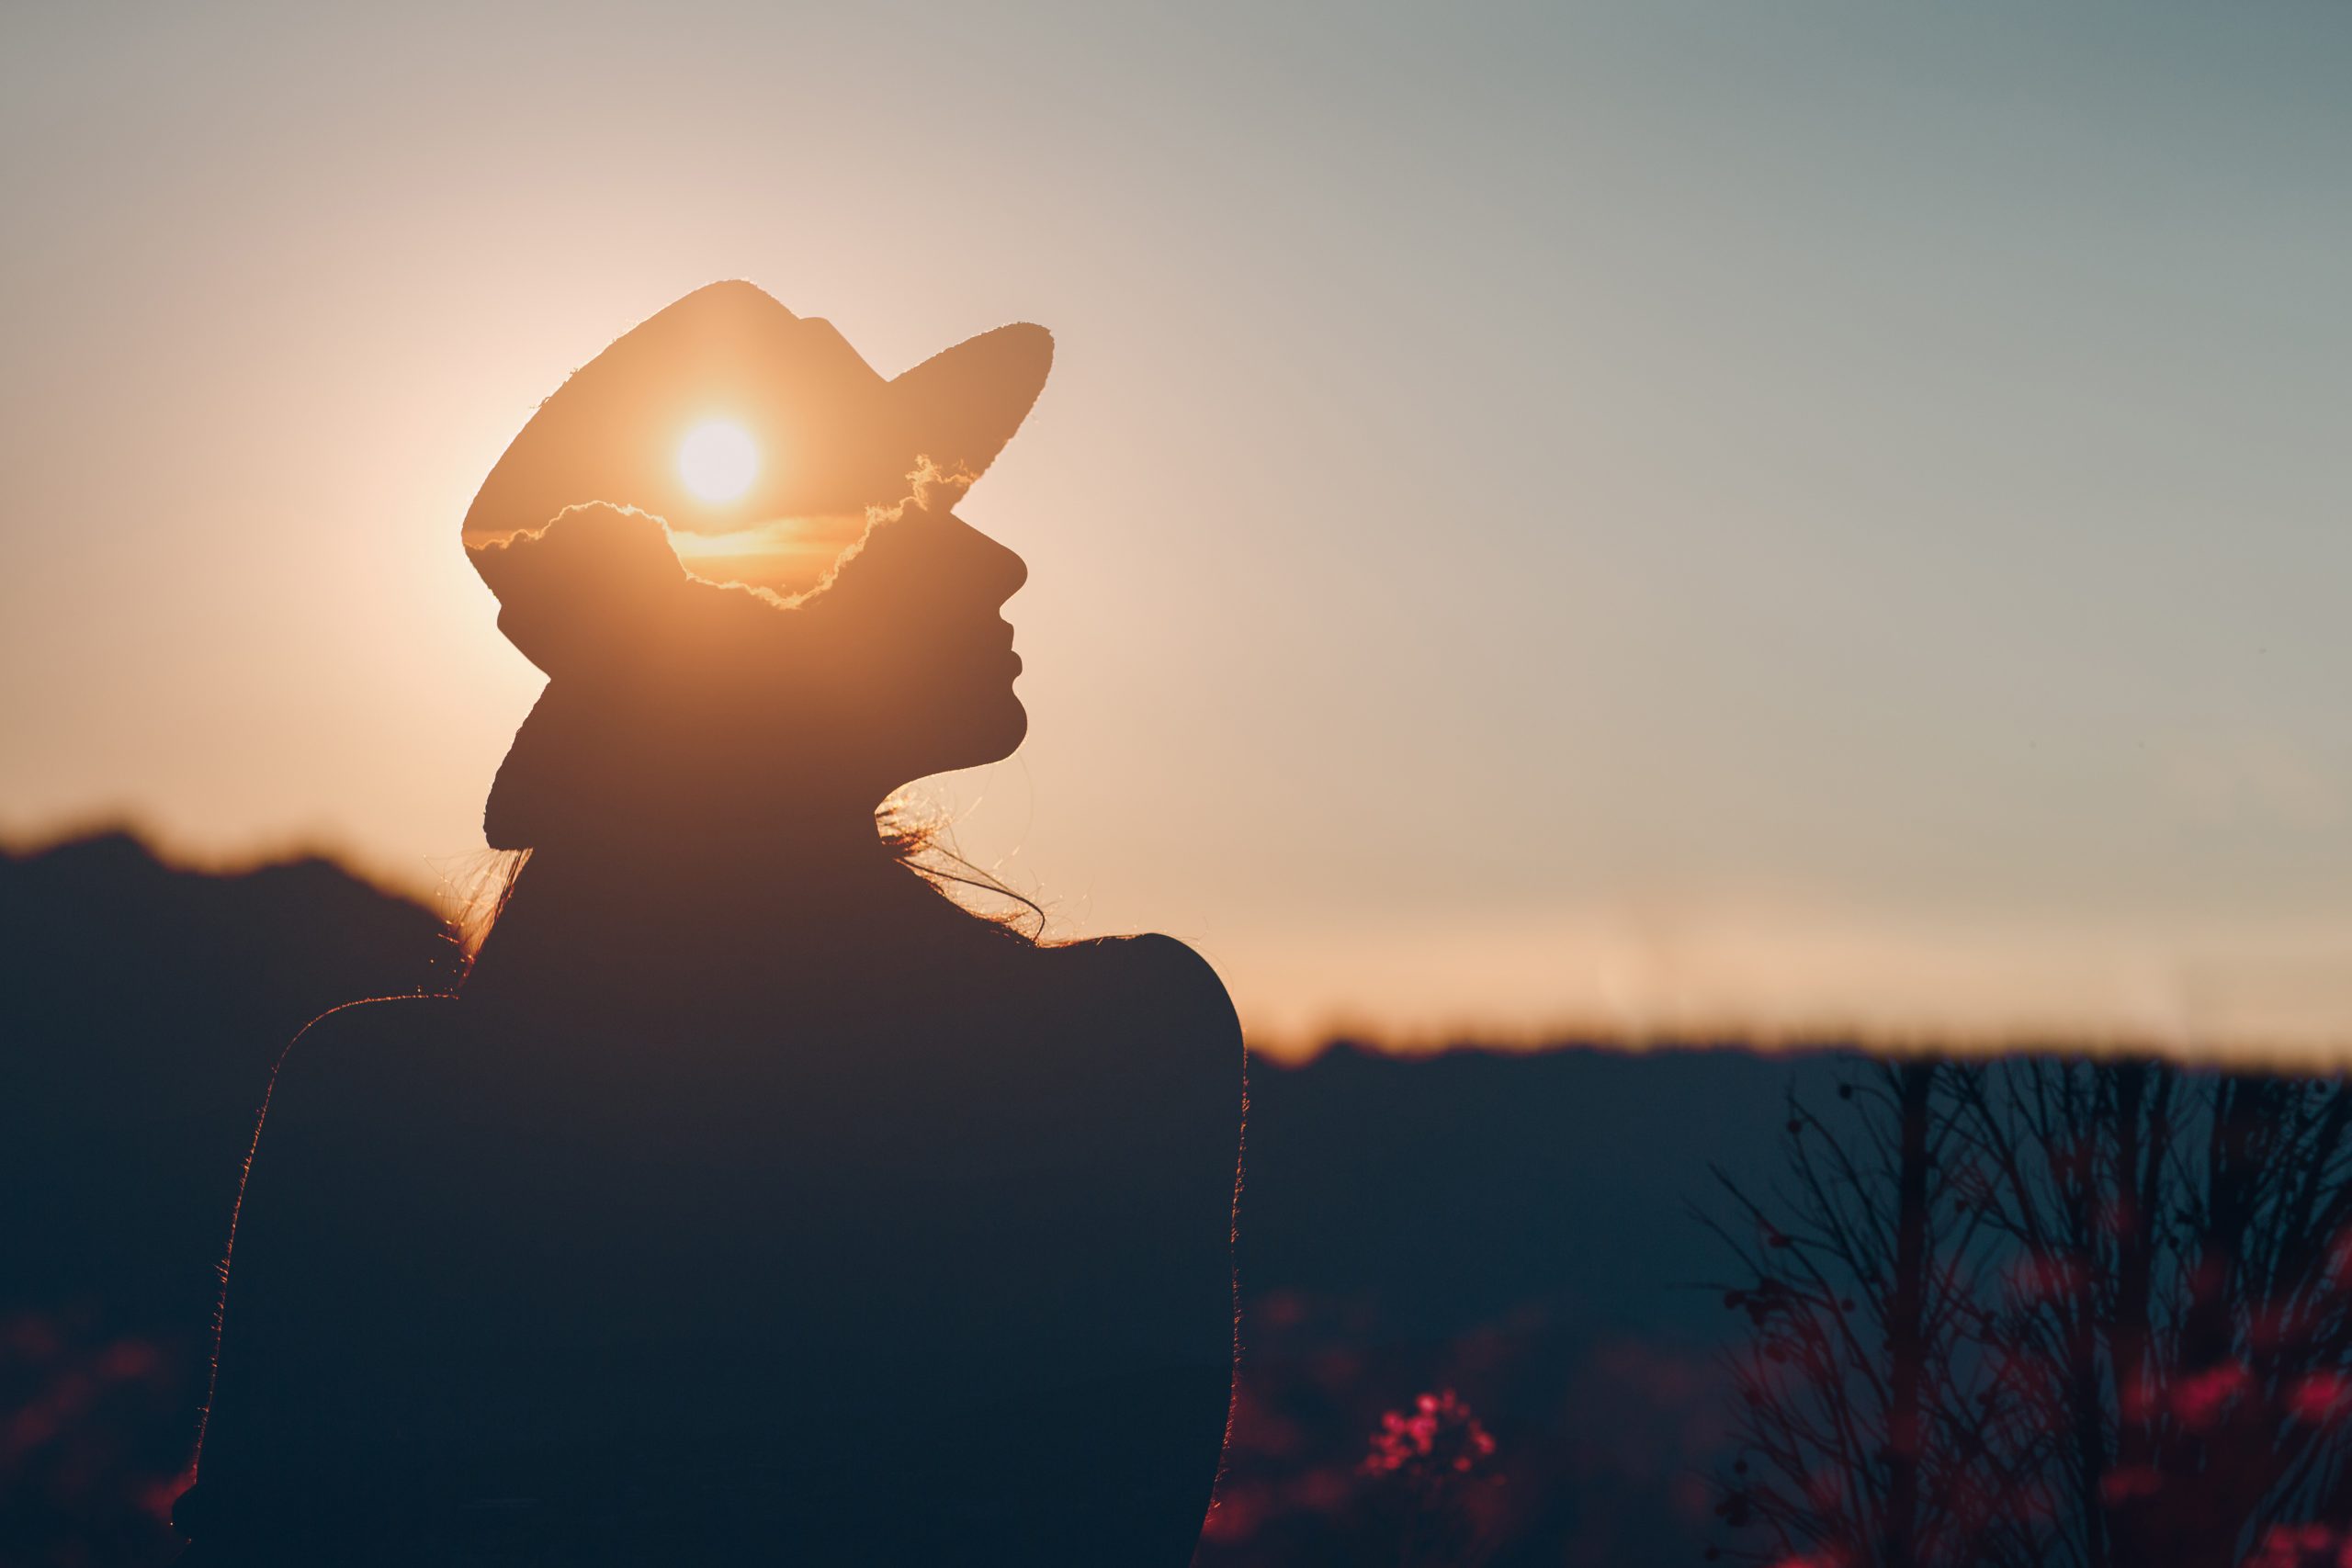 Silhouette of woman wearing a hat. The sun is shining through the hat, evoking an image of mental wellbeing.